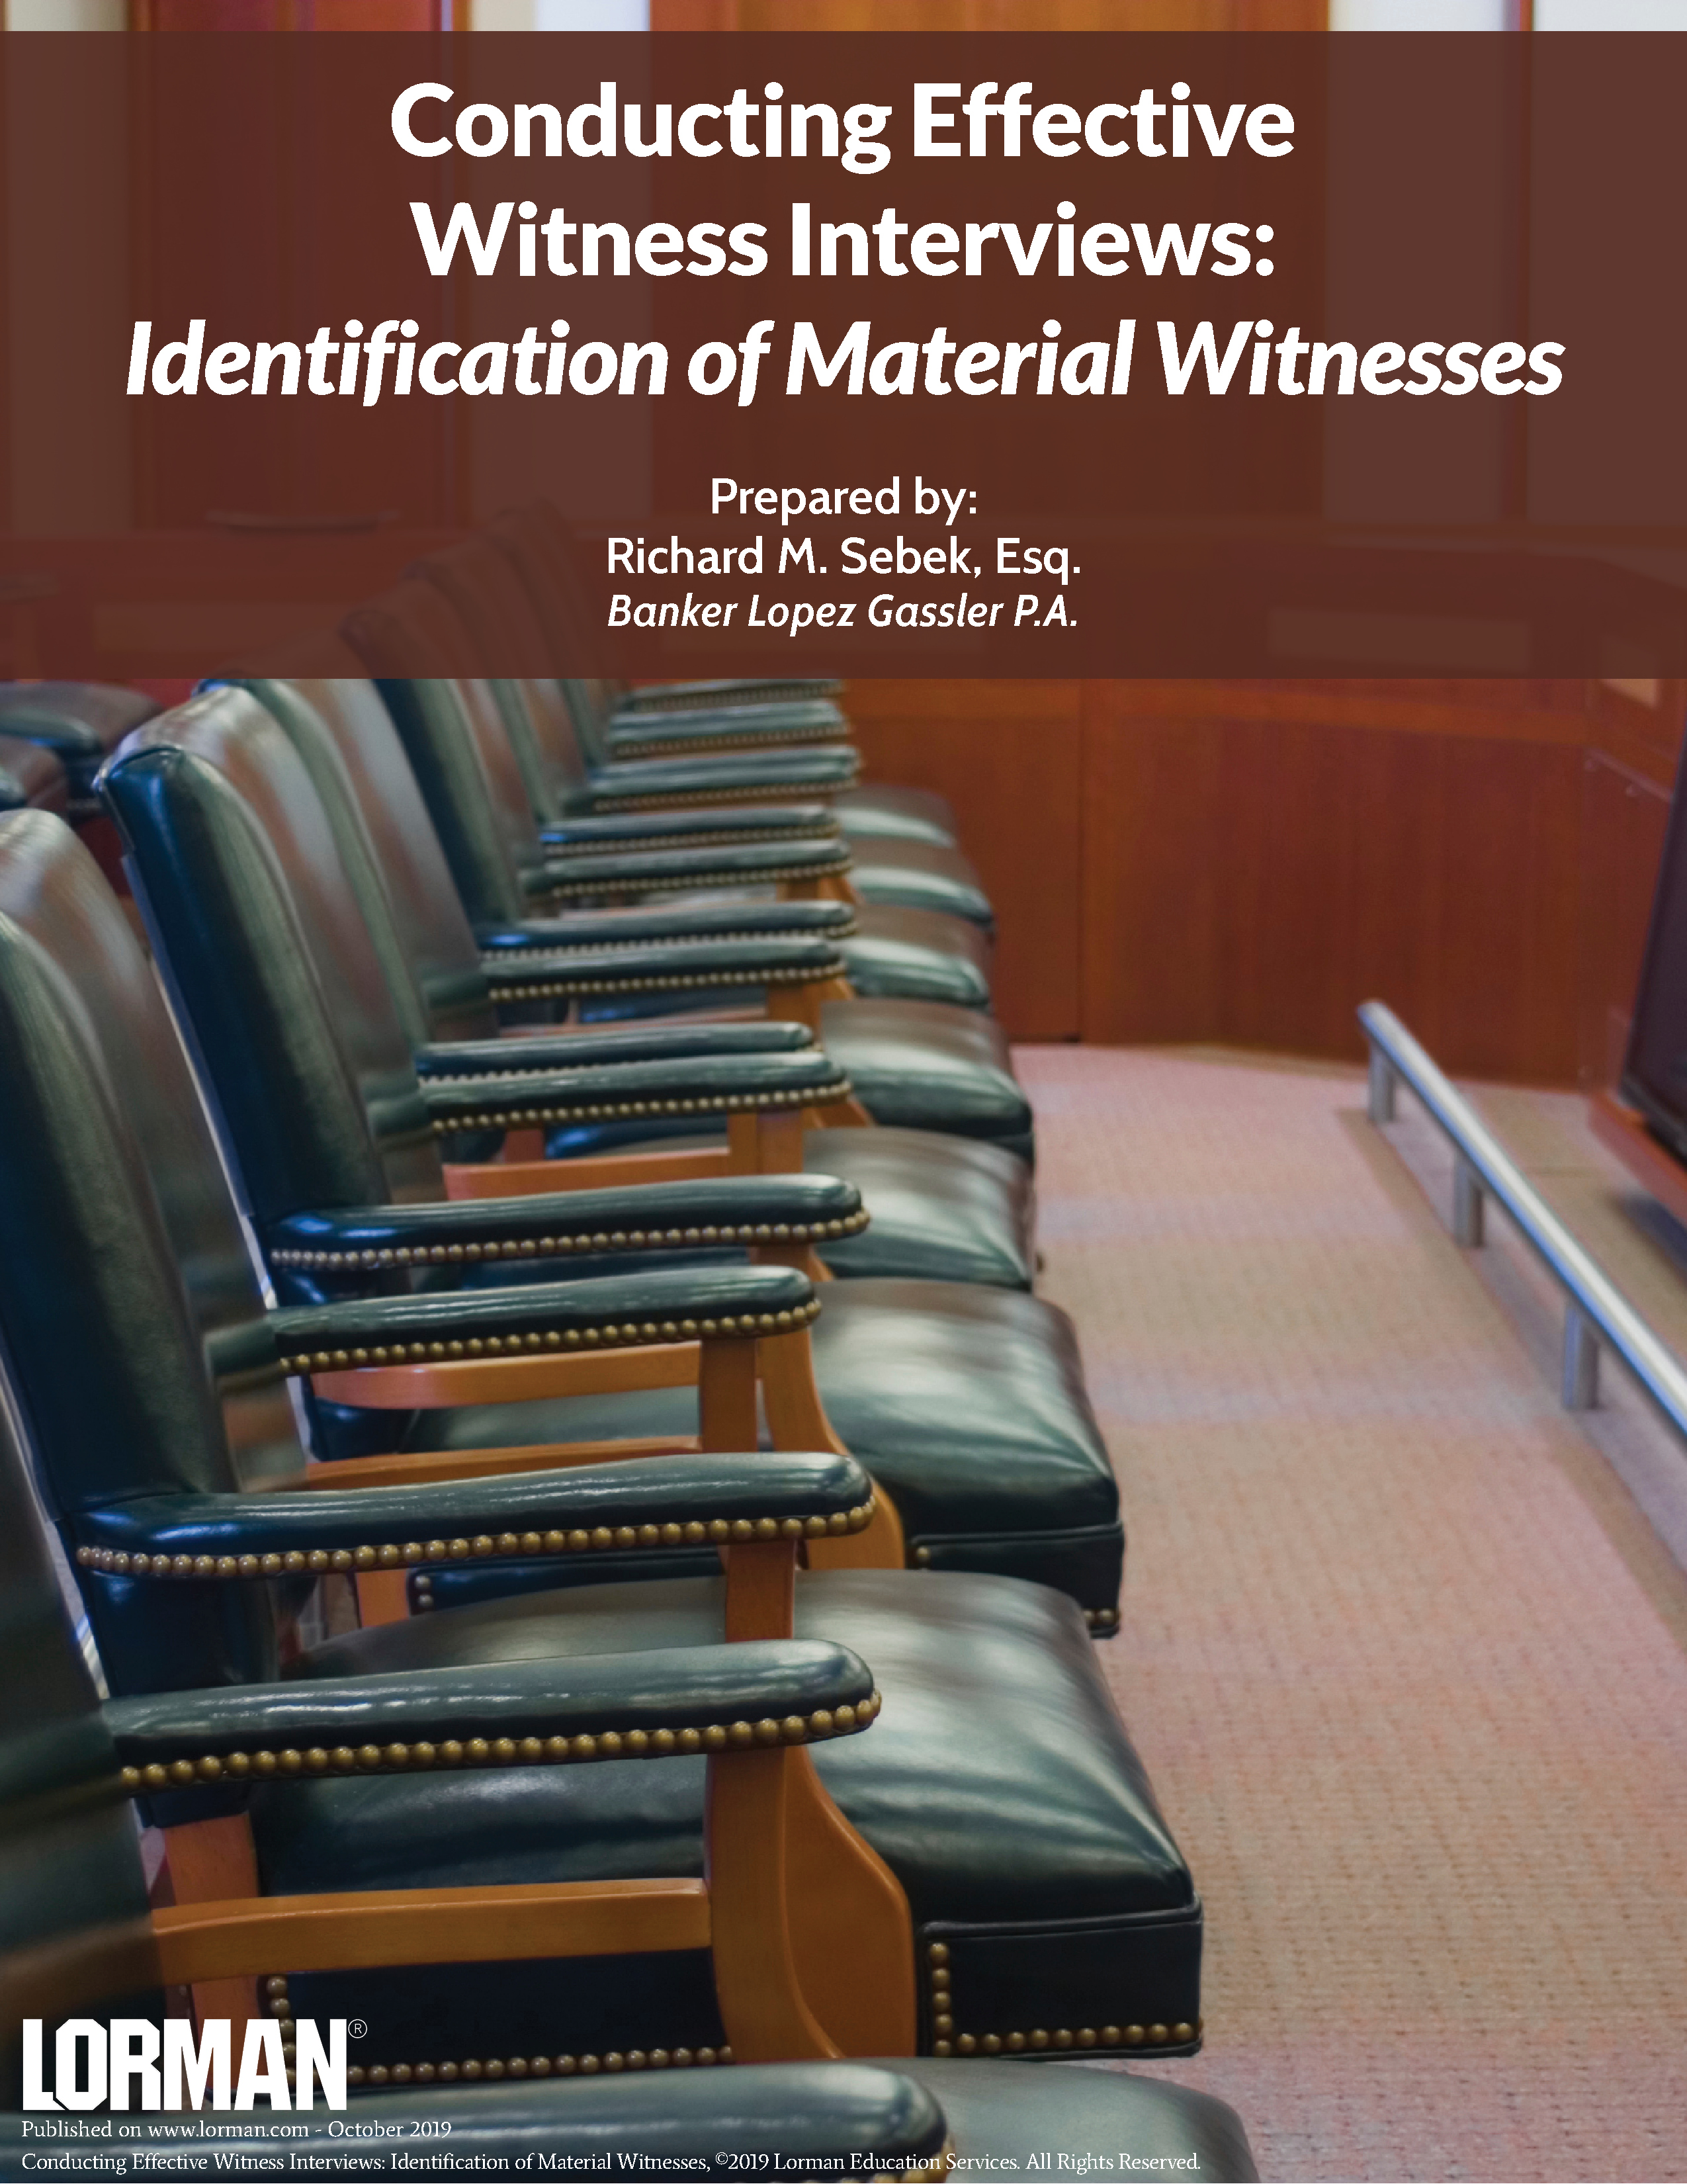 Conducting Effective Witness Interviews: Identification of Material Witnesses